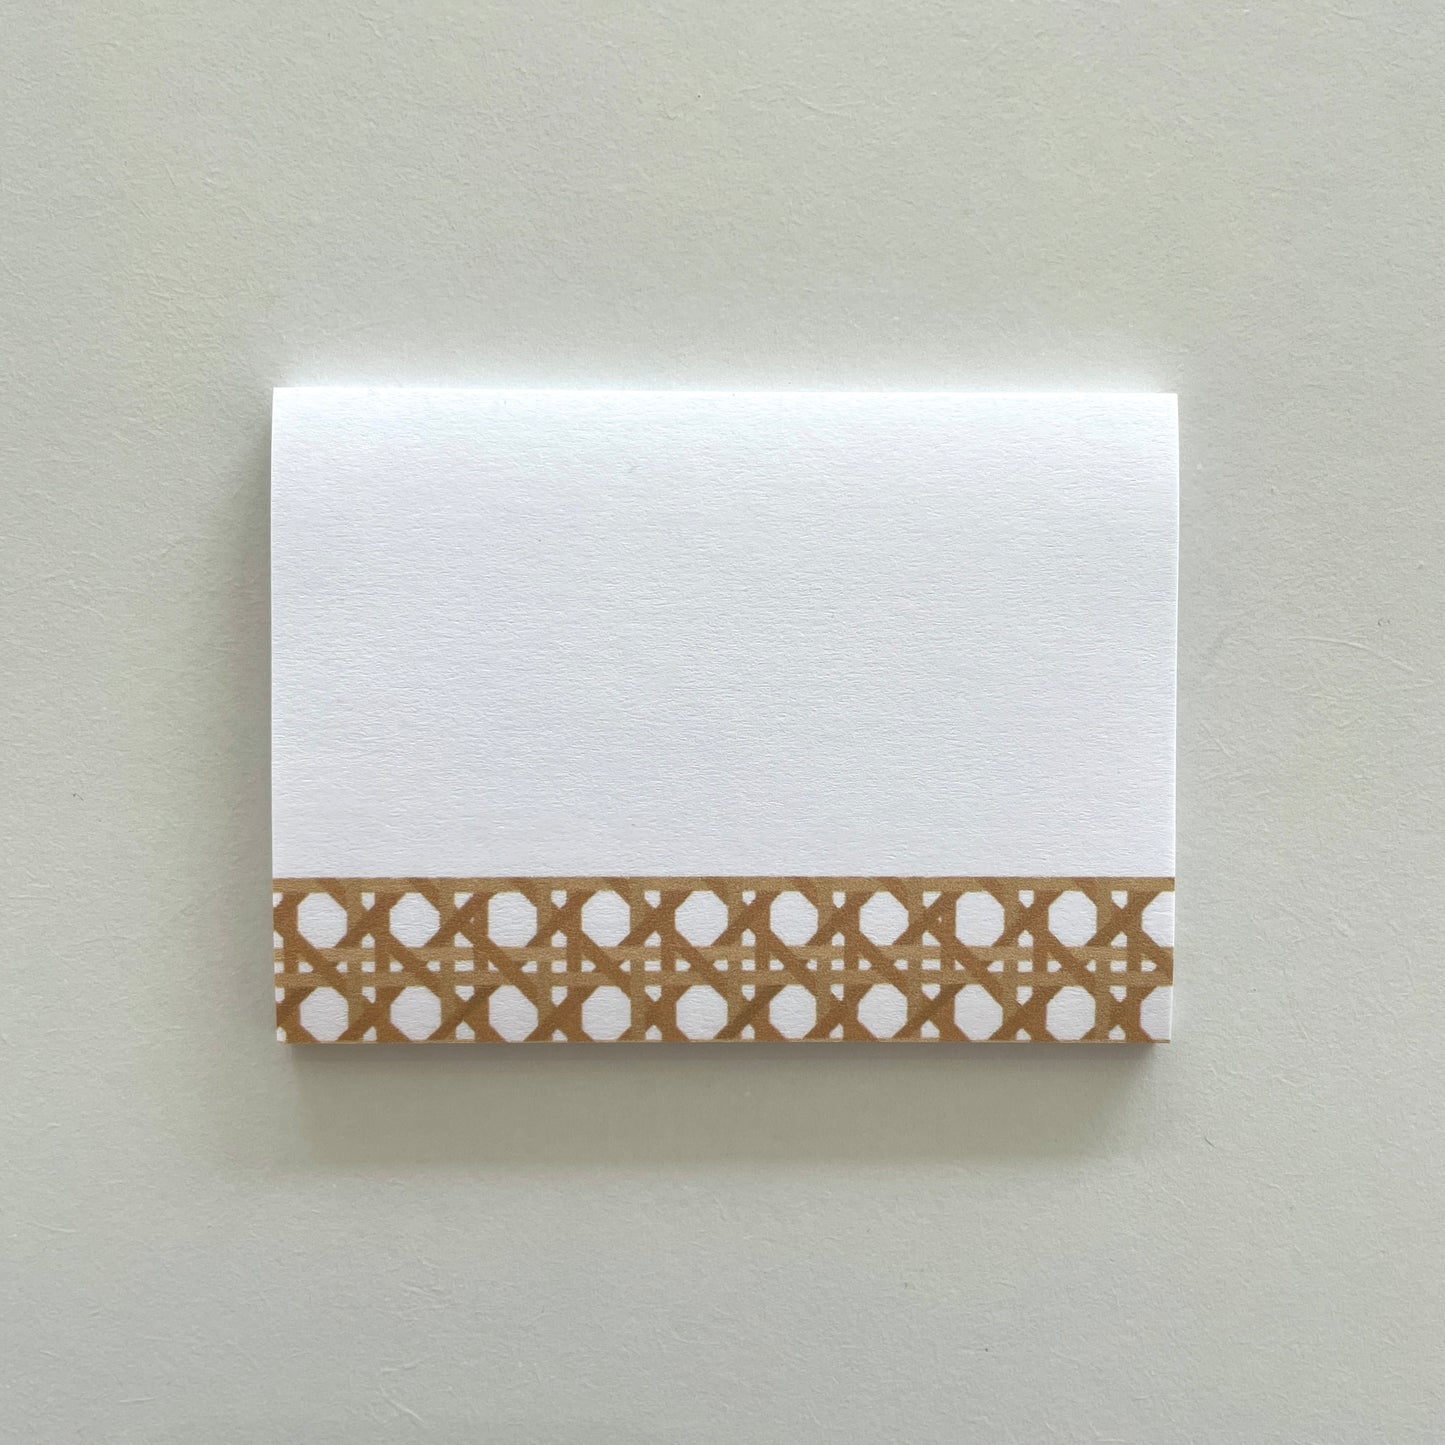 Cane Pattern Post-It Notes, 50 Sheets, 4x3 in.